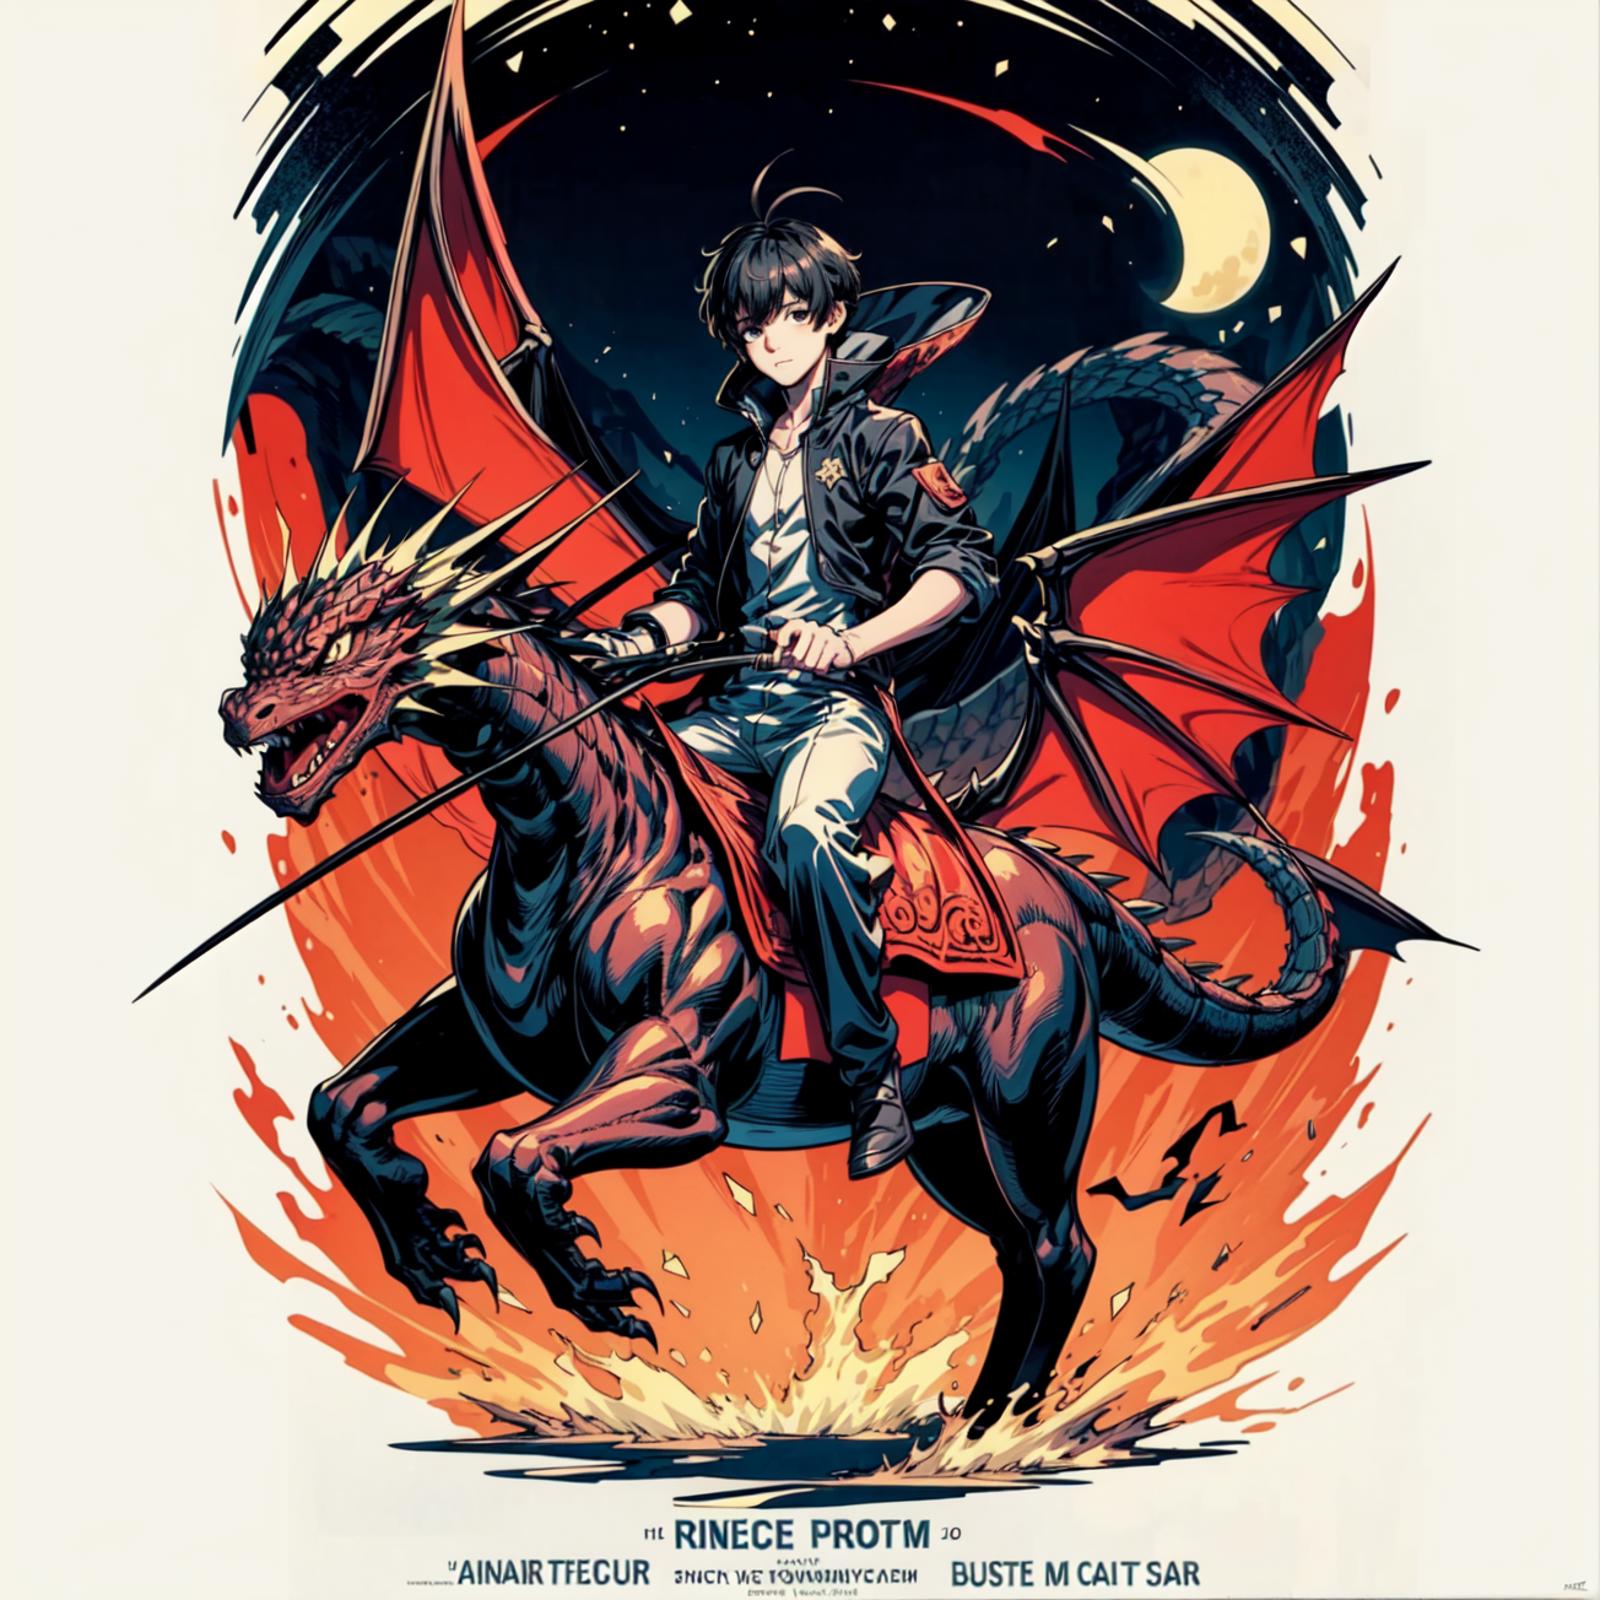 A man riding a dragon on a poster for an animated movie.